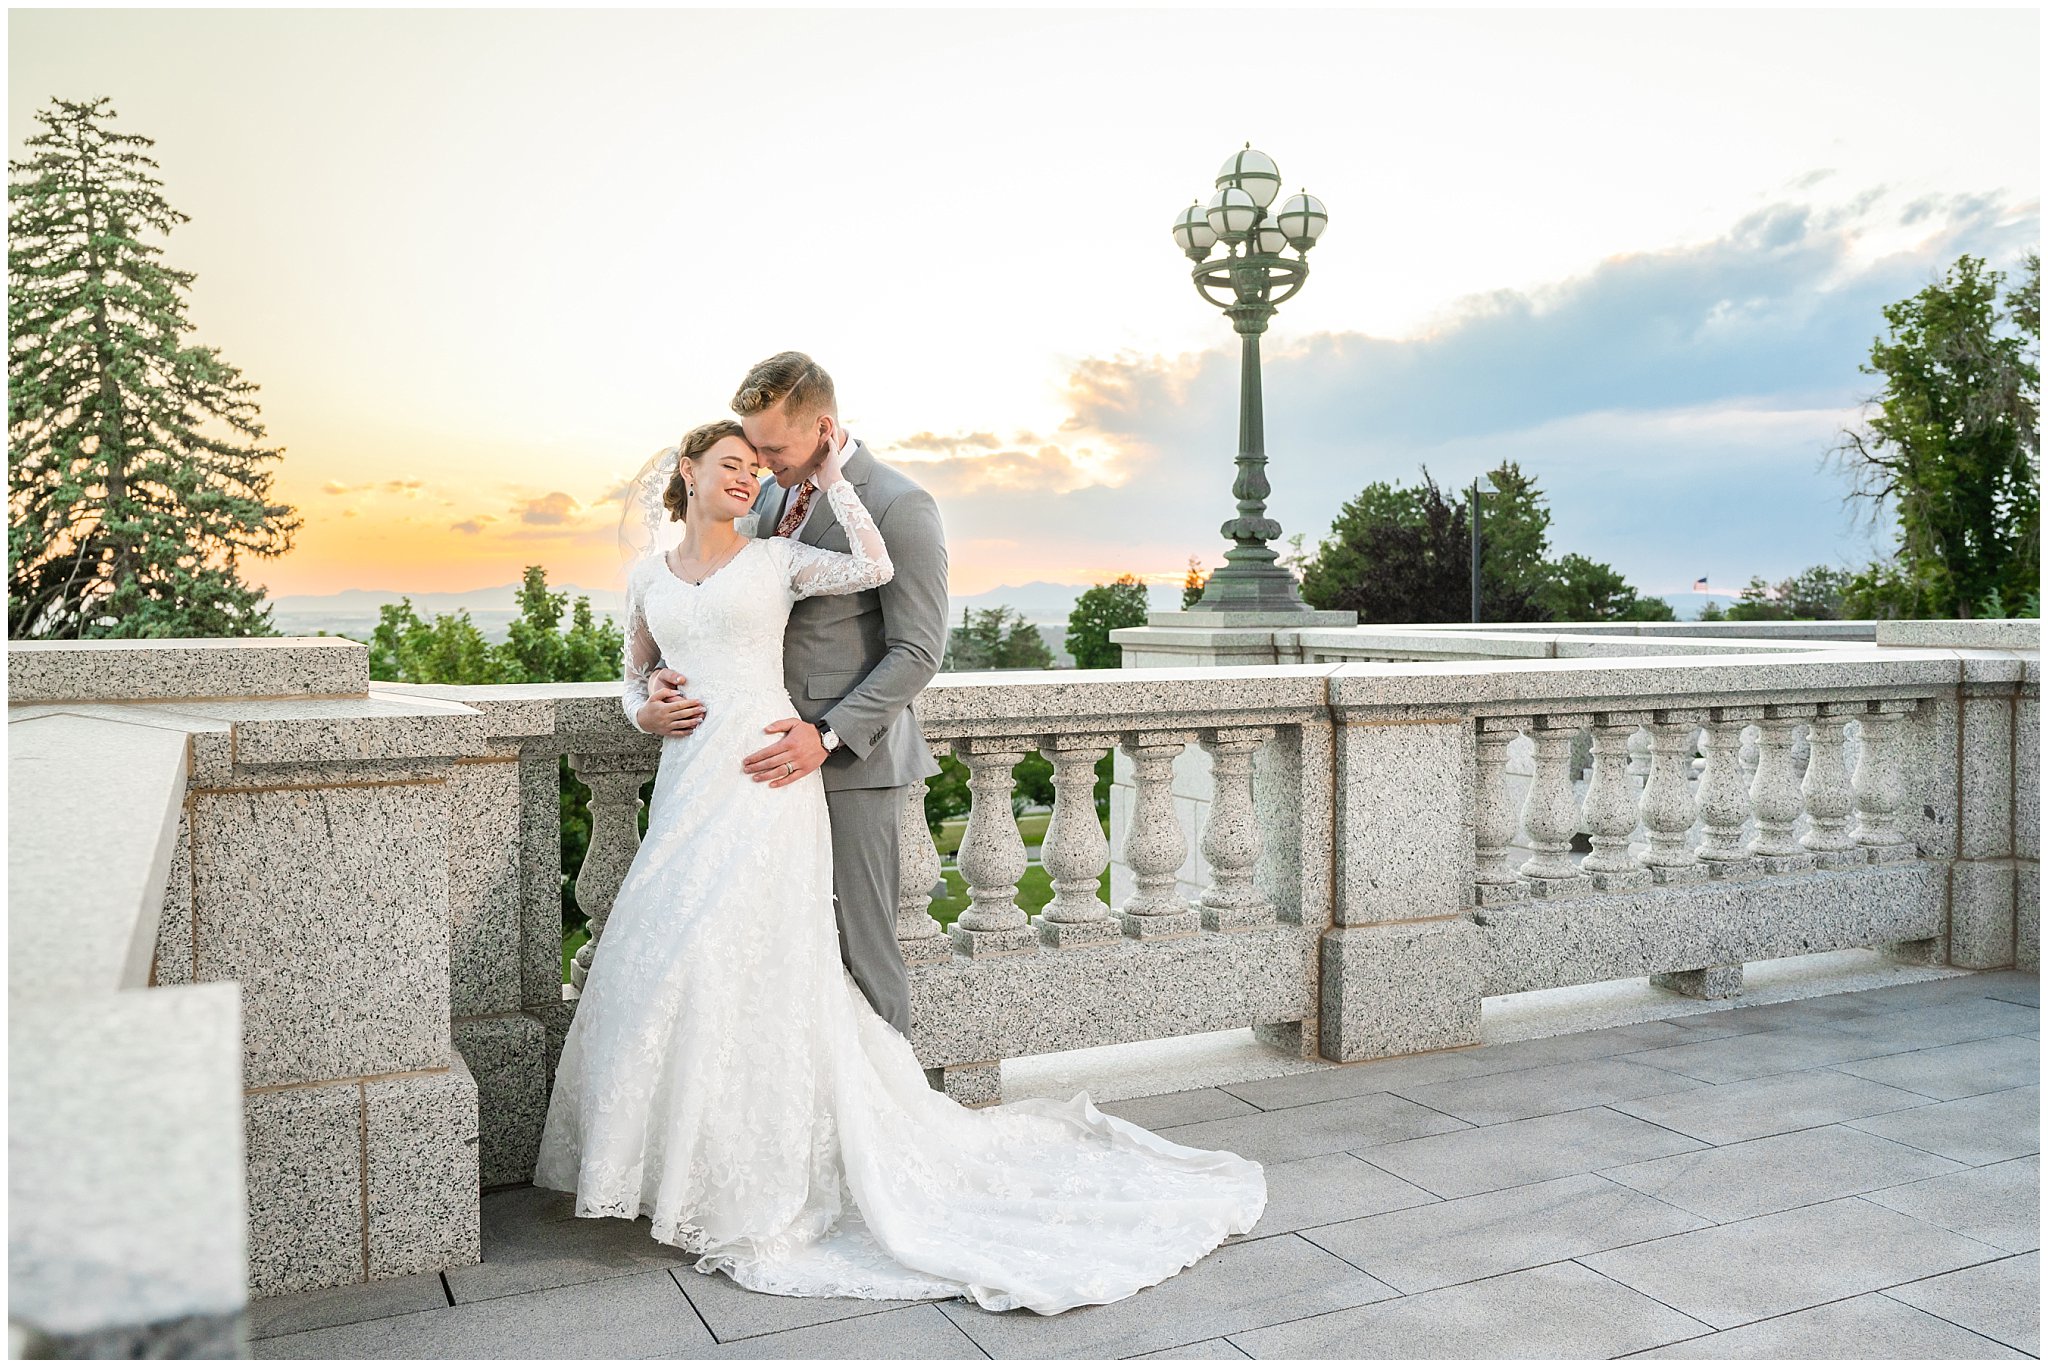 Bride and groom with long cathedral length veil sharing a romantic moment at sunset | Sunset Utah State Capitol Wedding Formal Session | Jessie and Dallin Photography